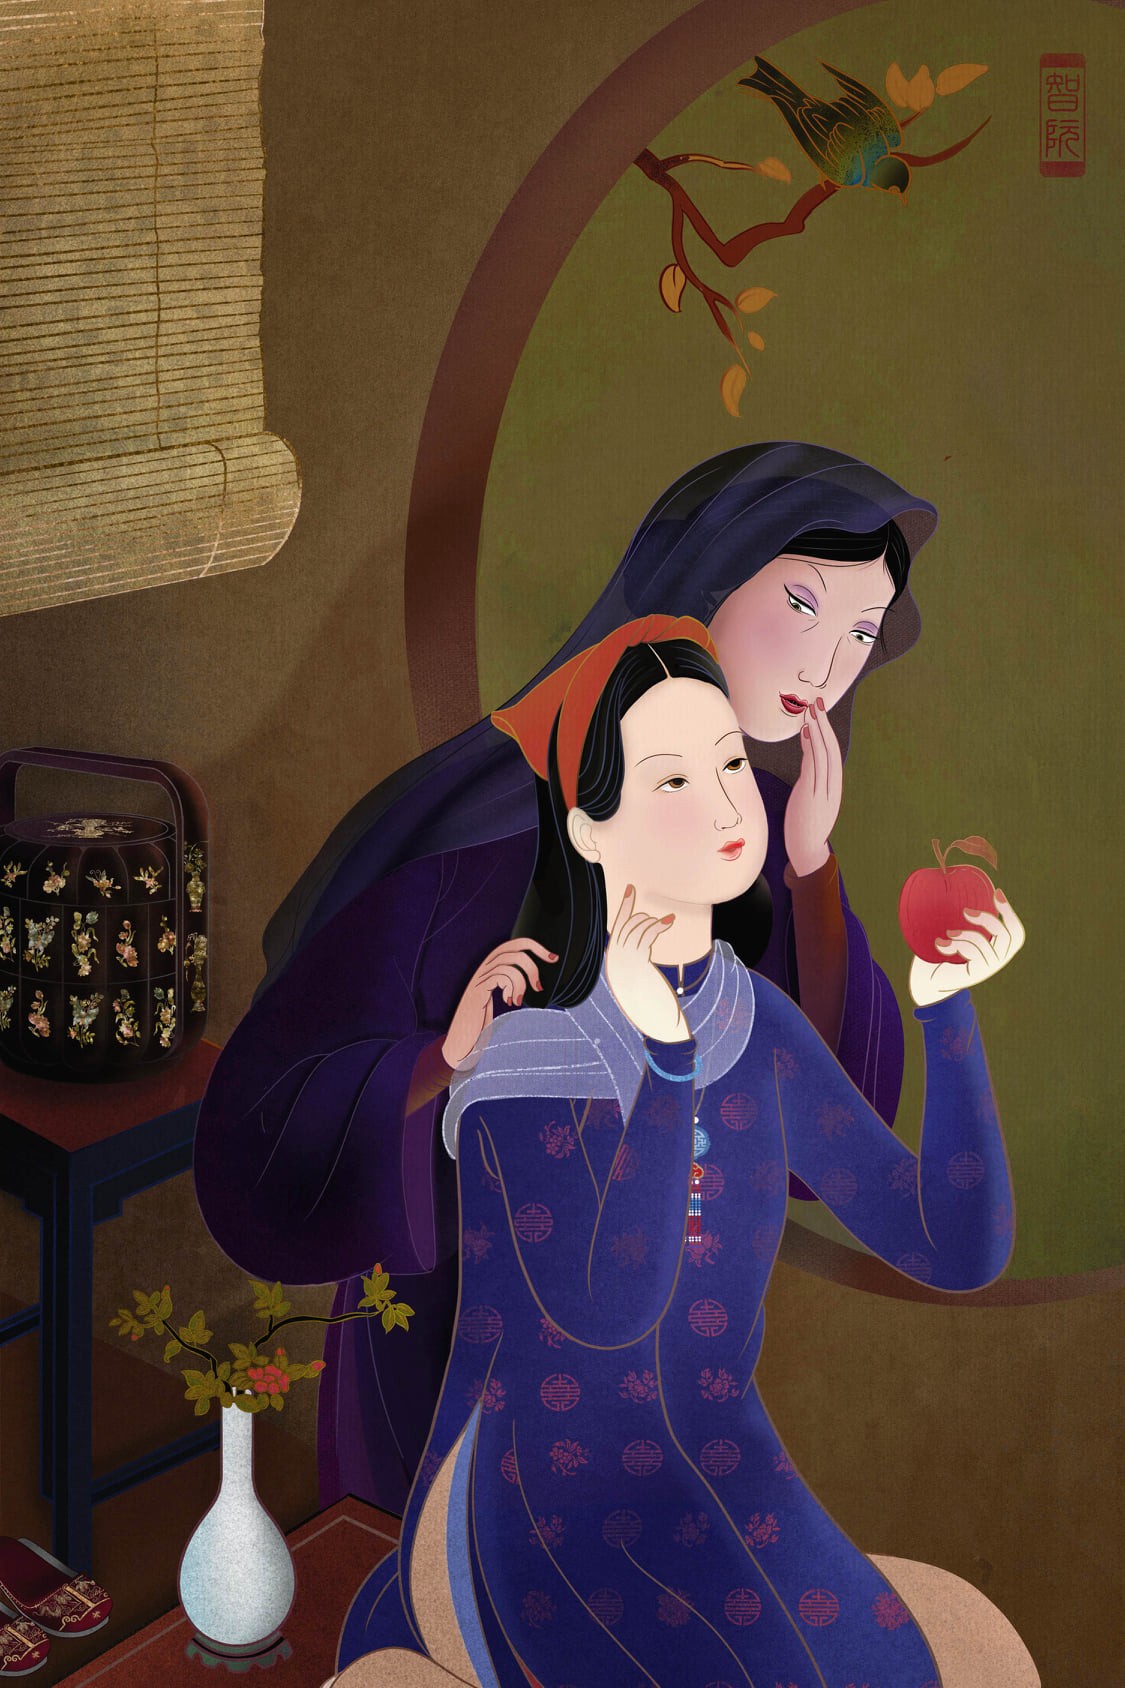 What If Disney Fairy Characters are Vietnamese?